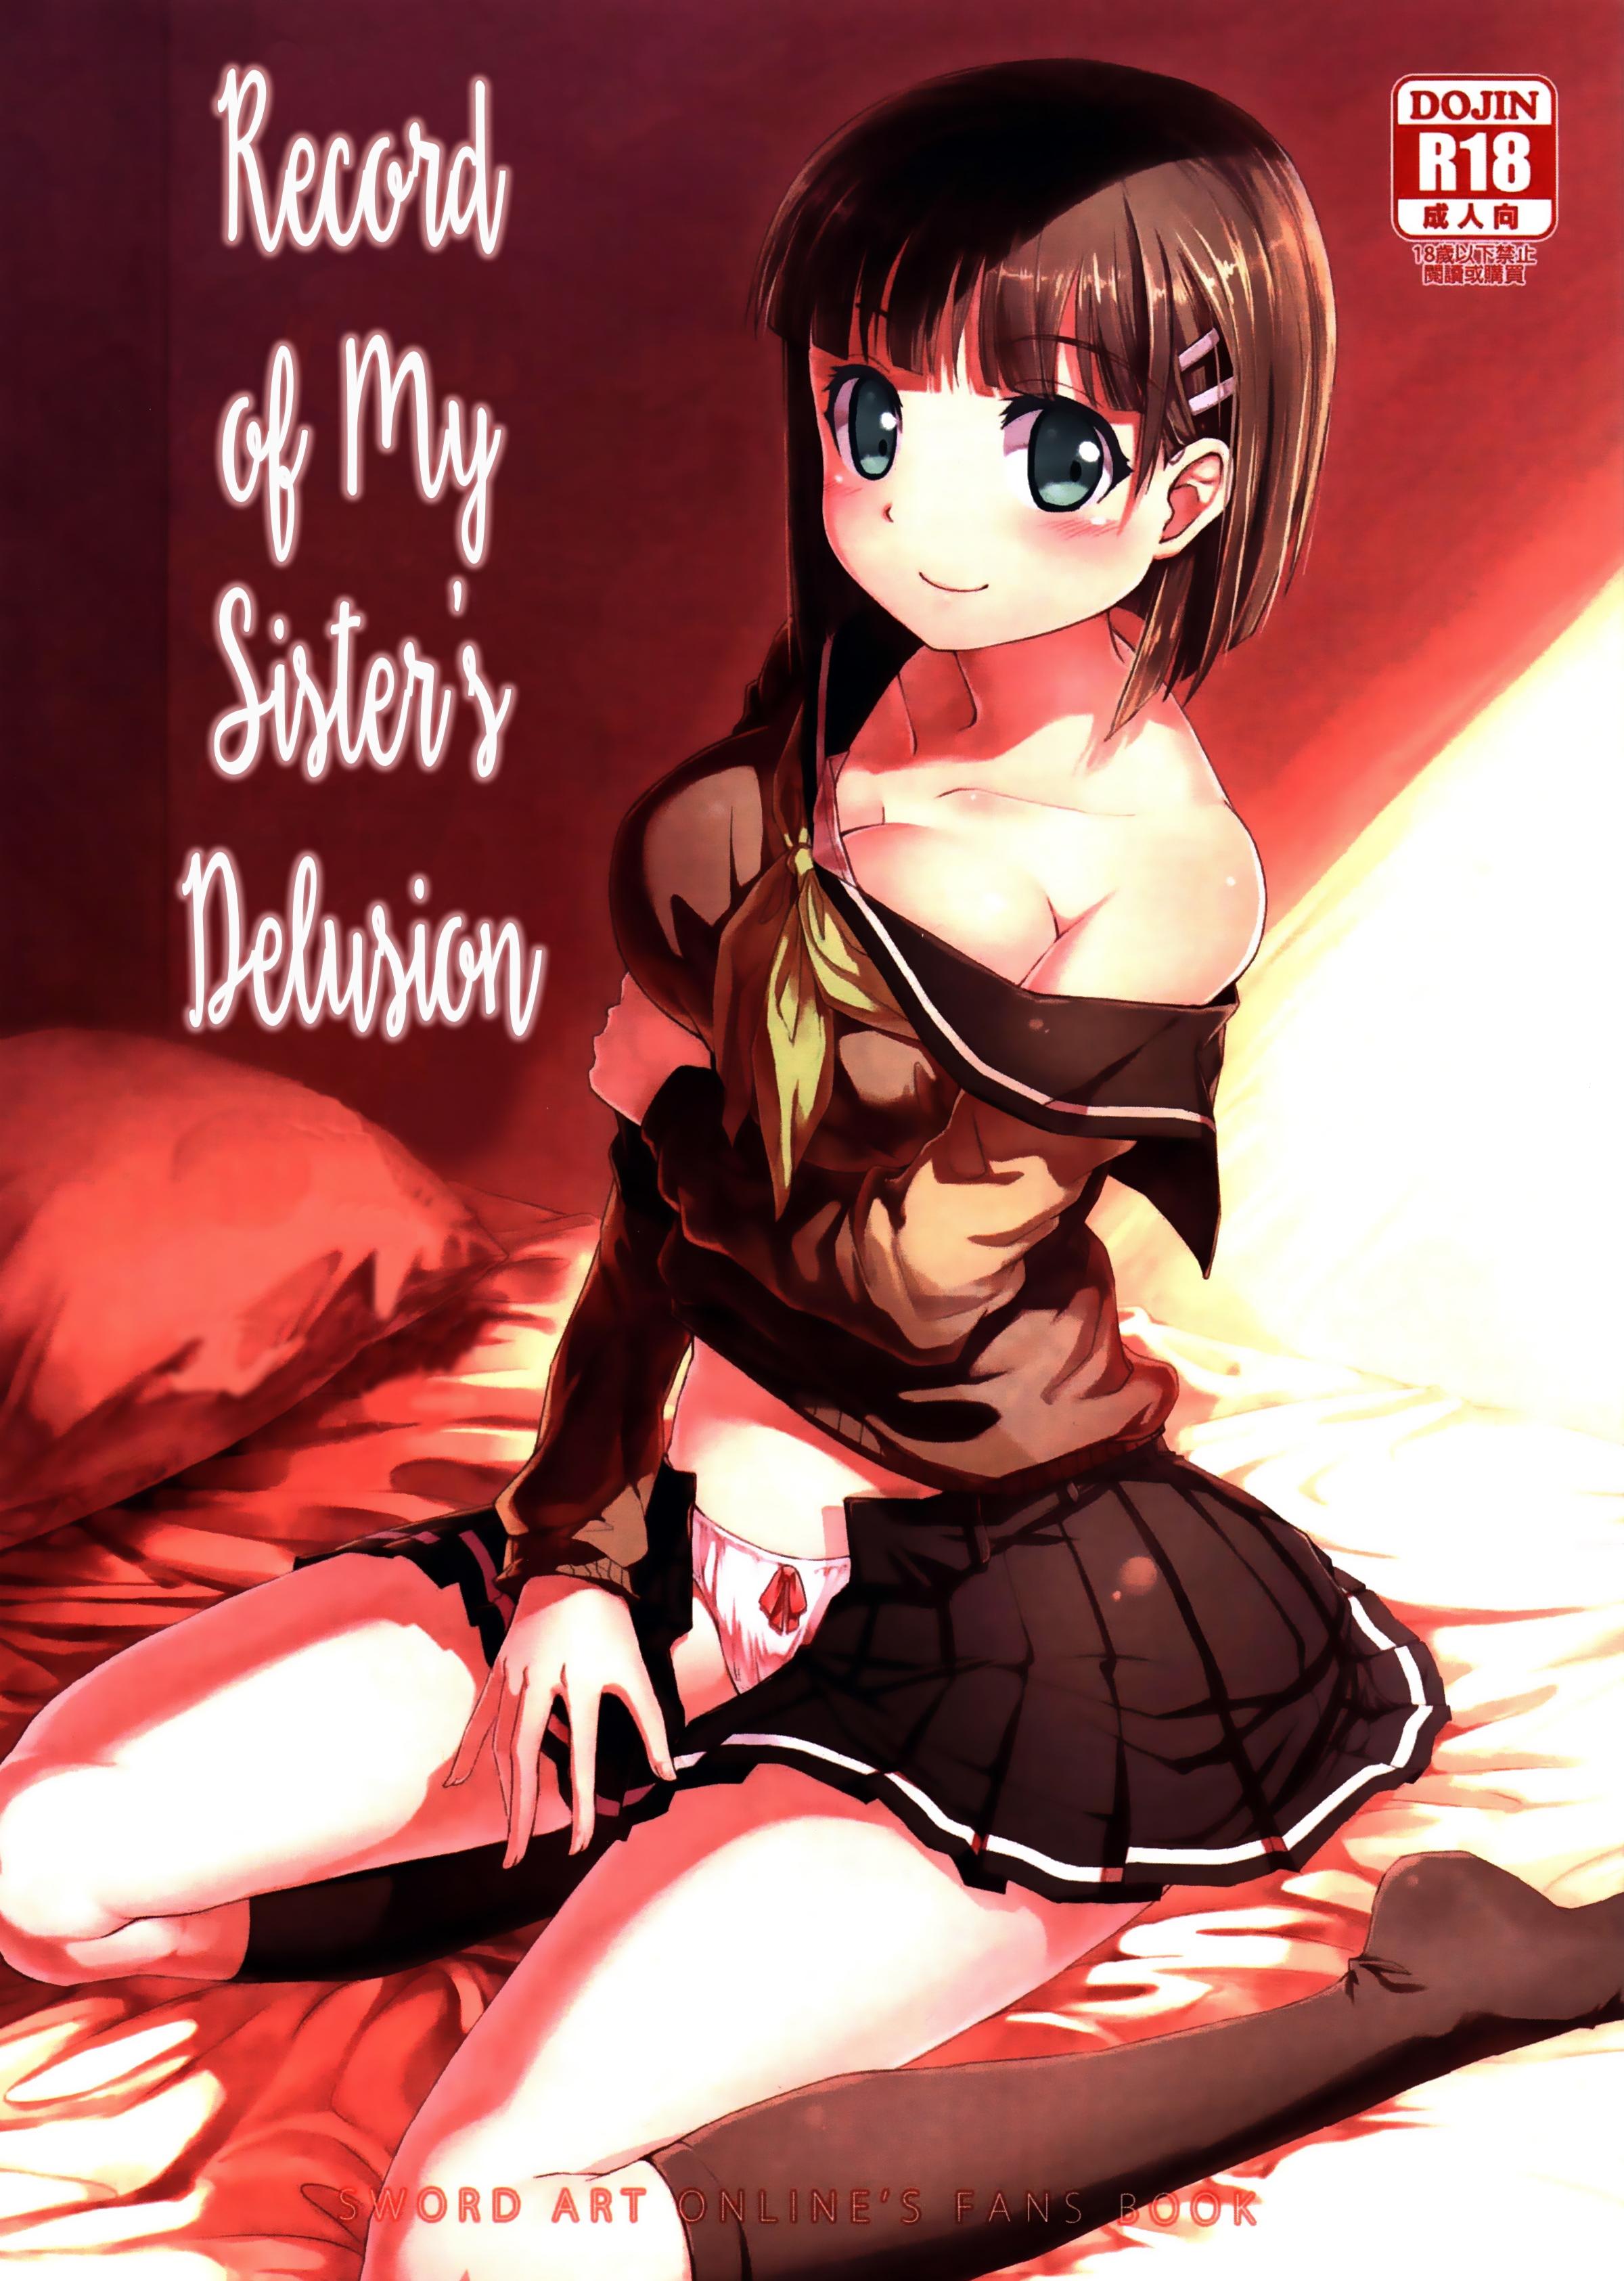 Southbamboo - Record of My Sister’s Delusion (Sword Art Online)